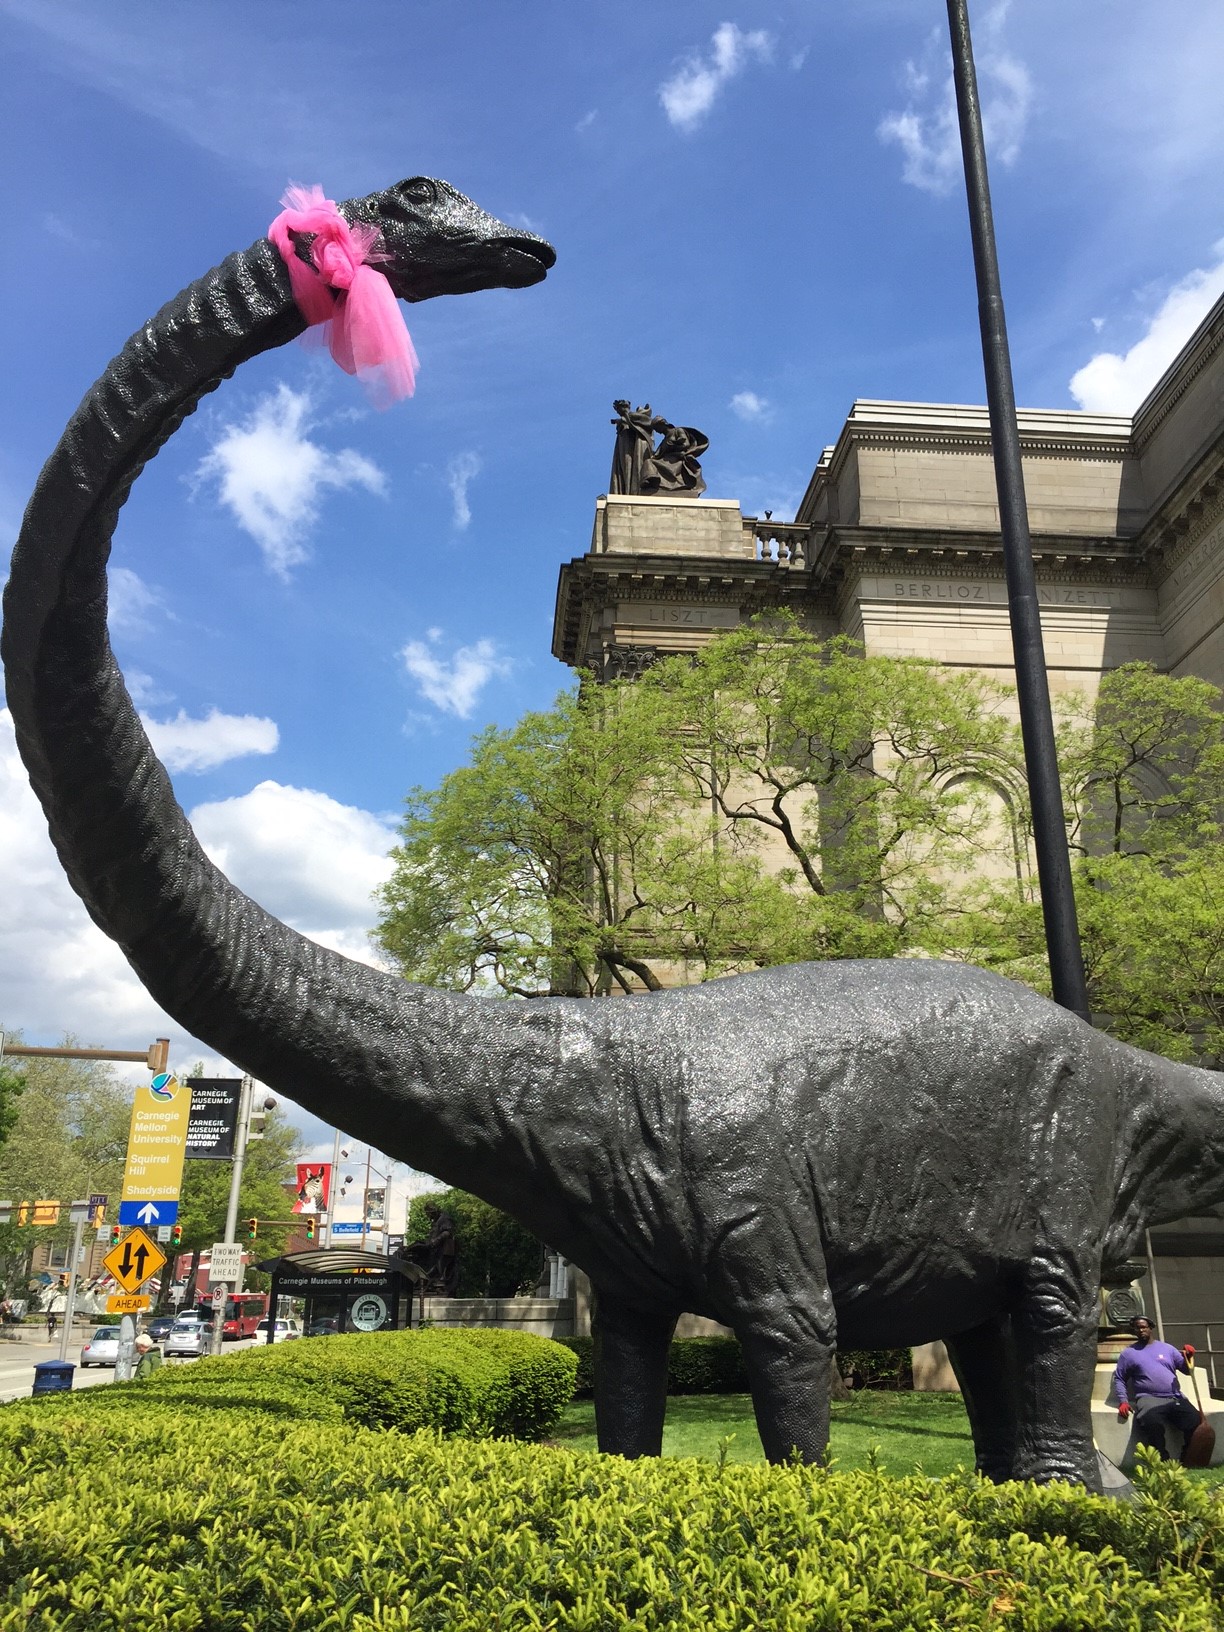 Dippy with Pink Scarf